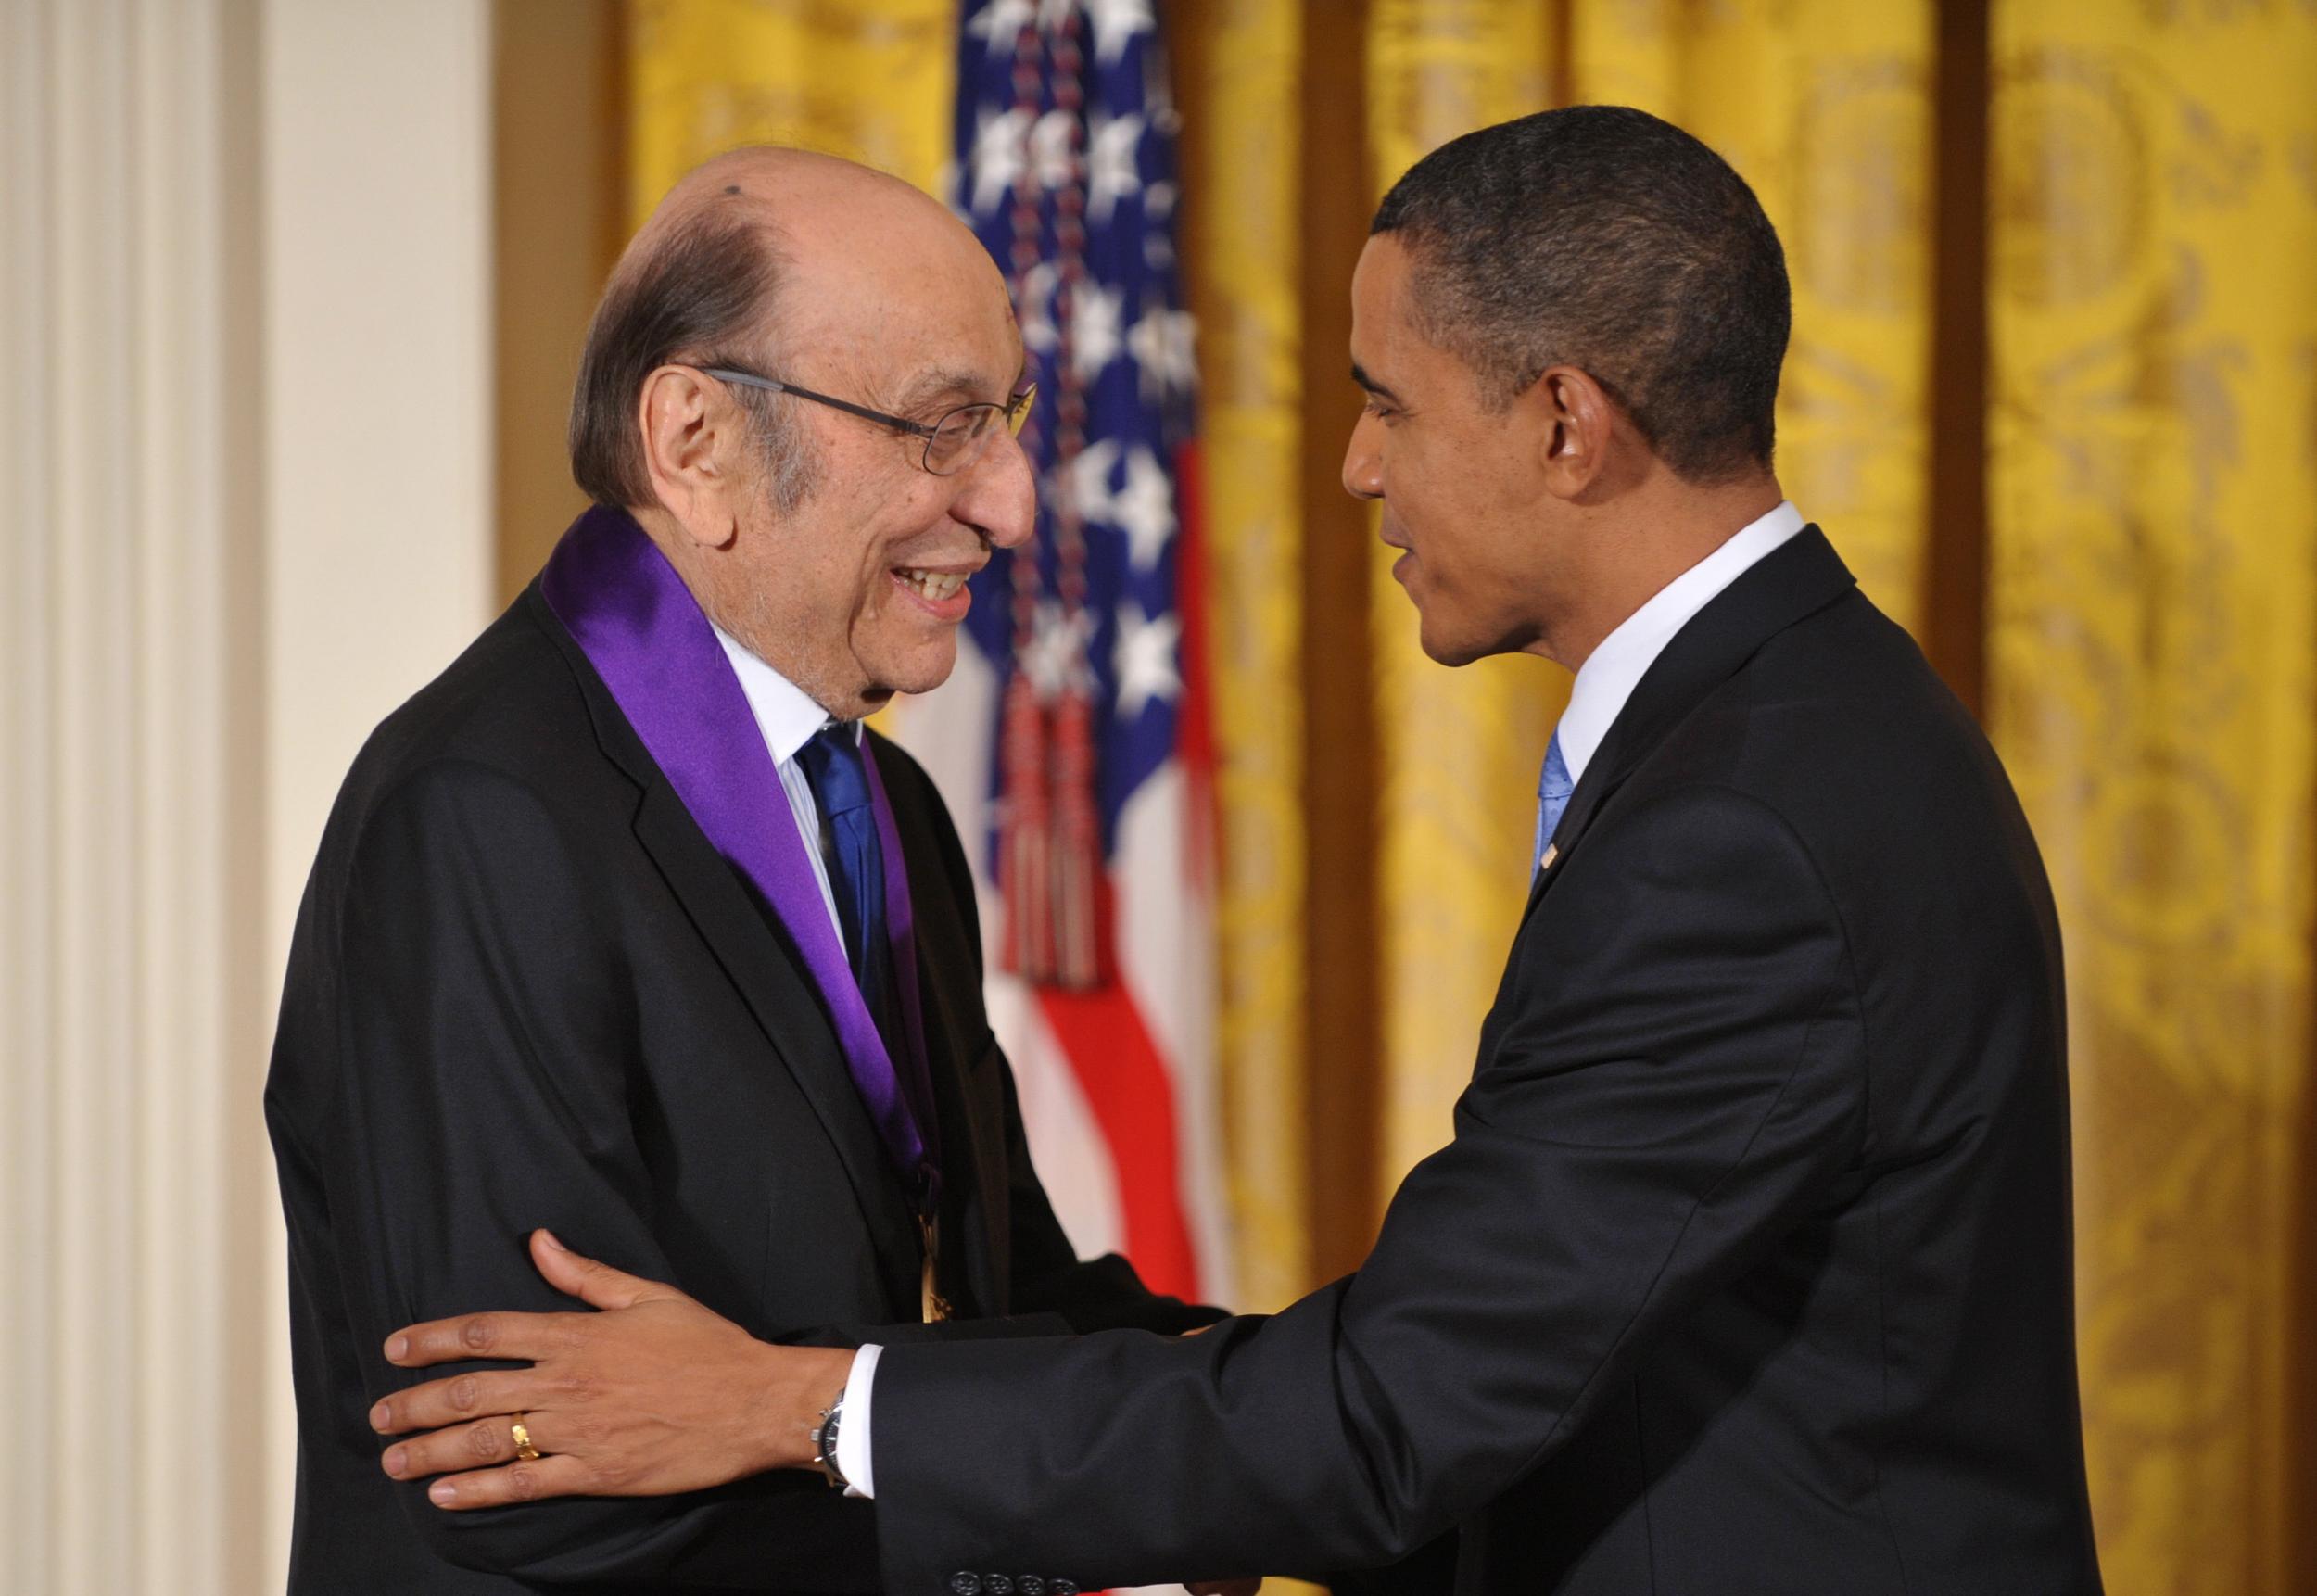 Glaser was awarded the National Medal of Arts in 2009